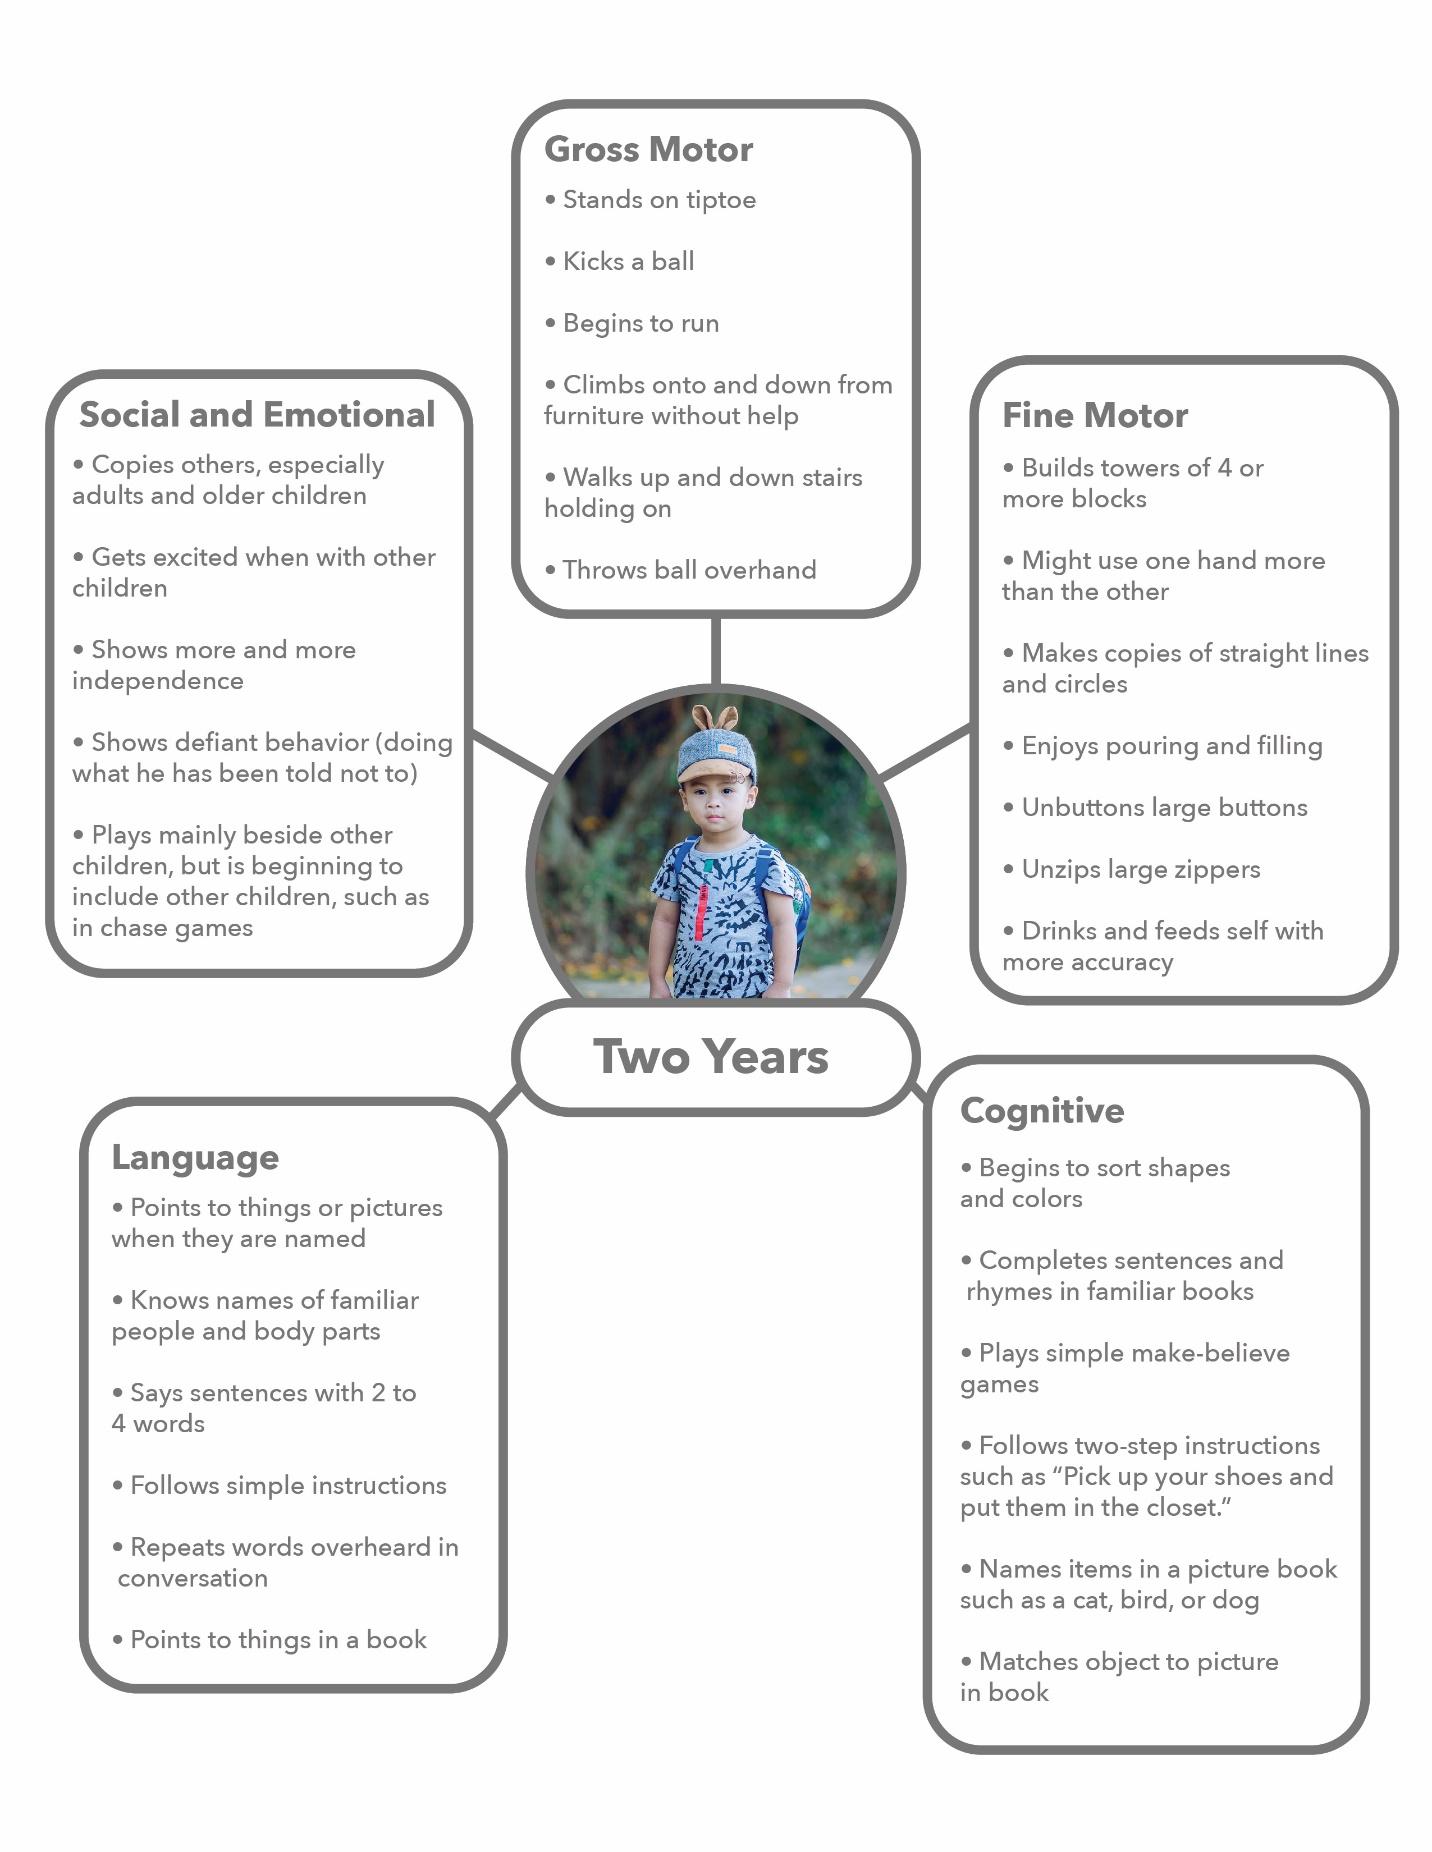 A graphic showing the develomental milestones of a two-year-old